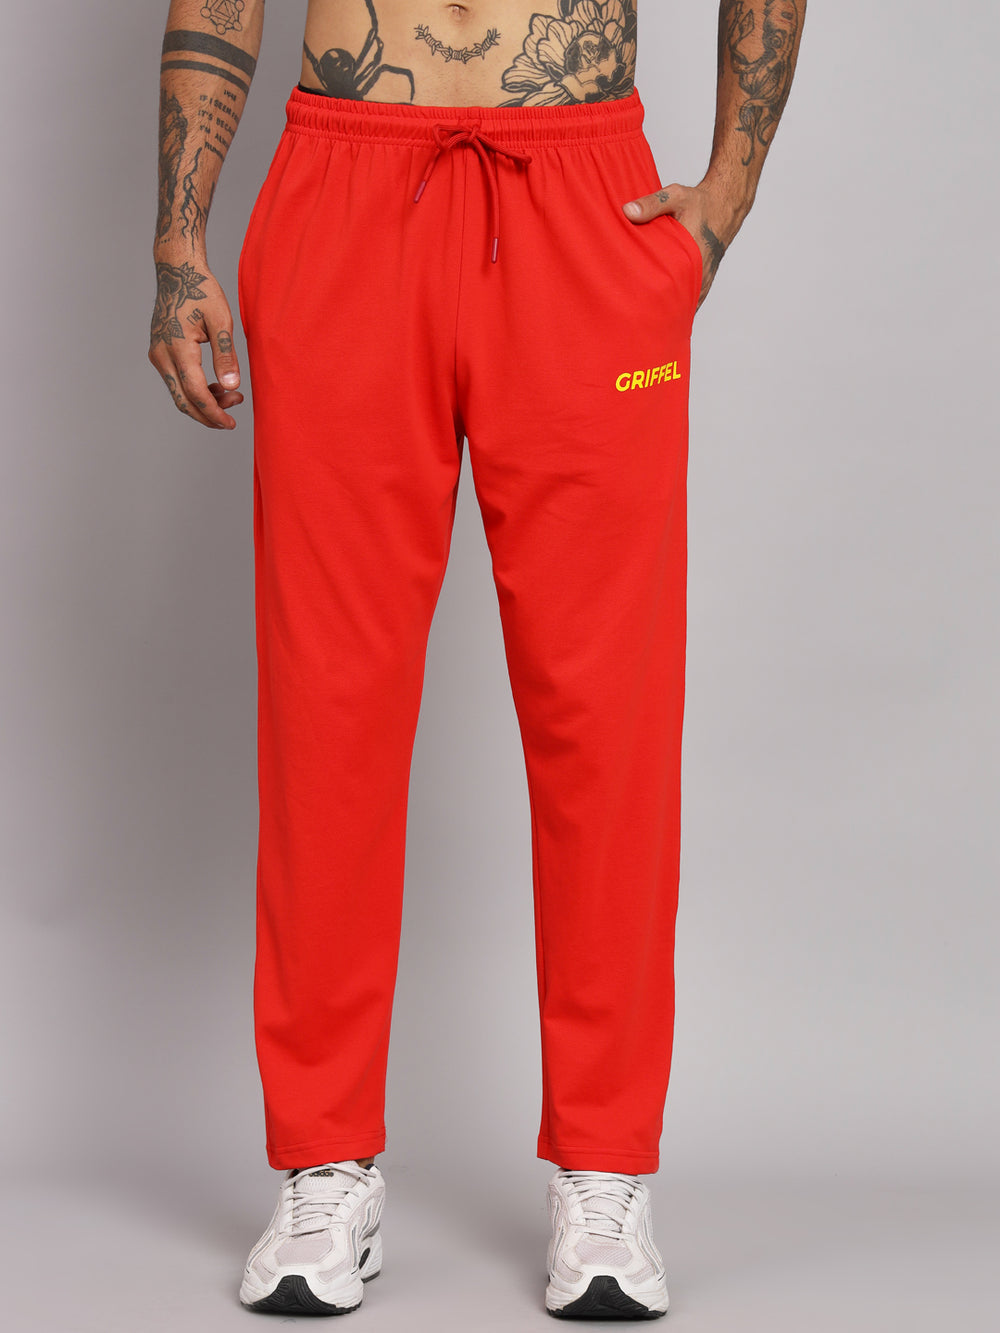 Griffel Men's Pre Winter Front Logo Solid Cotton Basic Hoodie and Joggers Full set Red Tracksuit - griffel